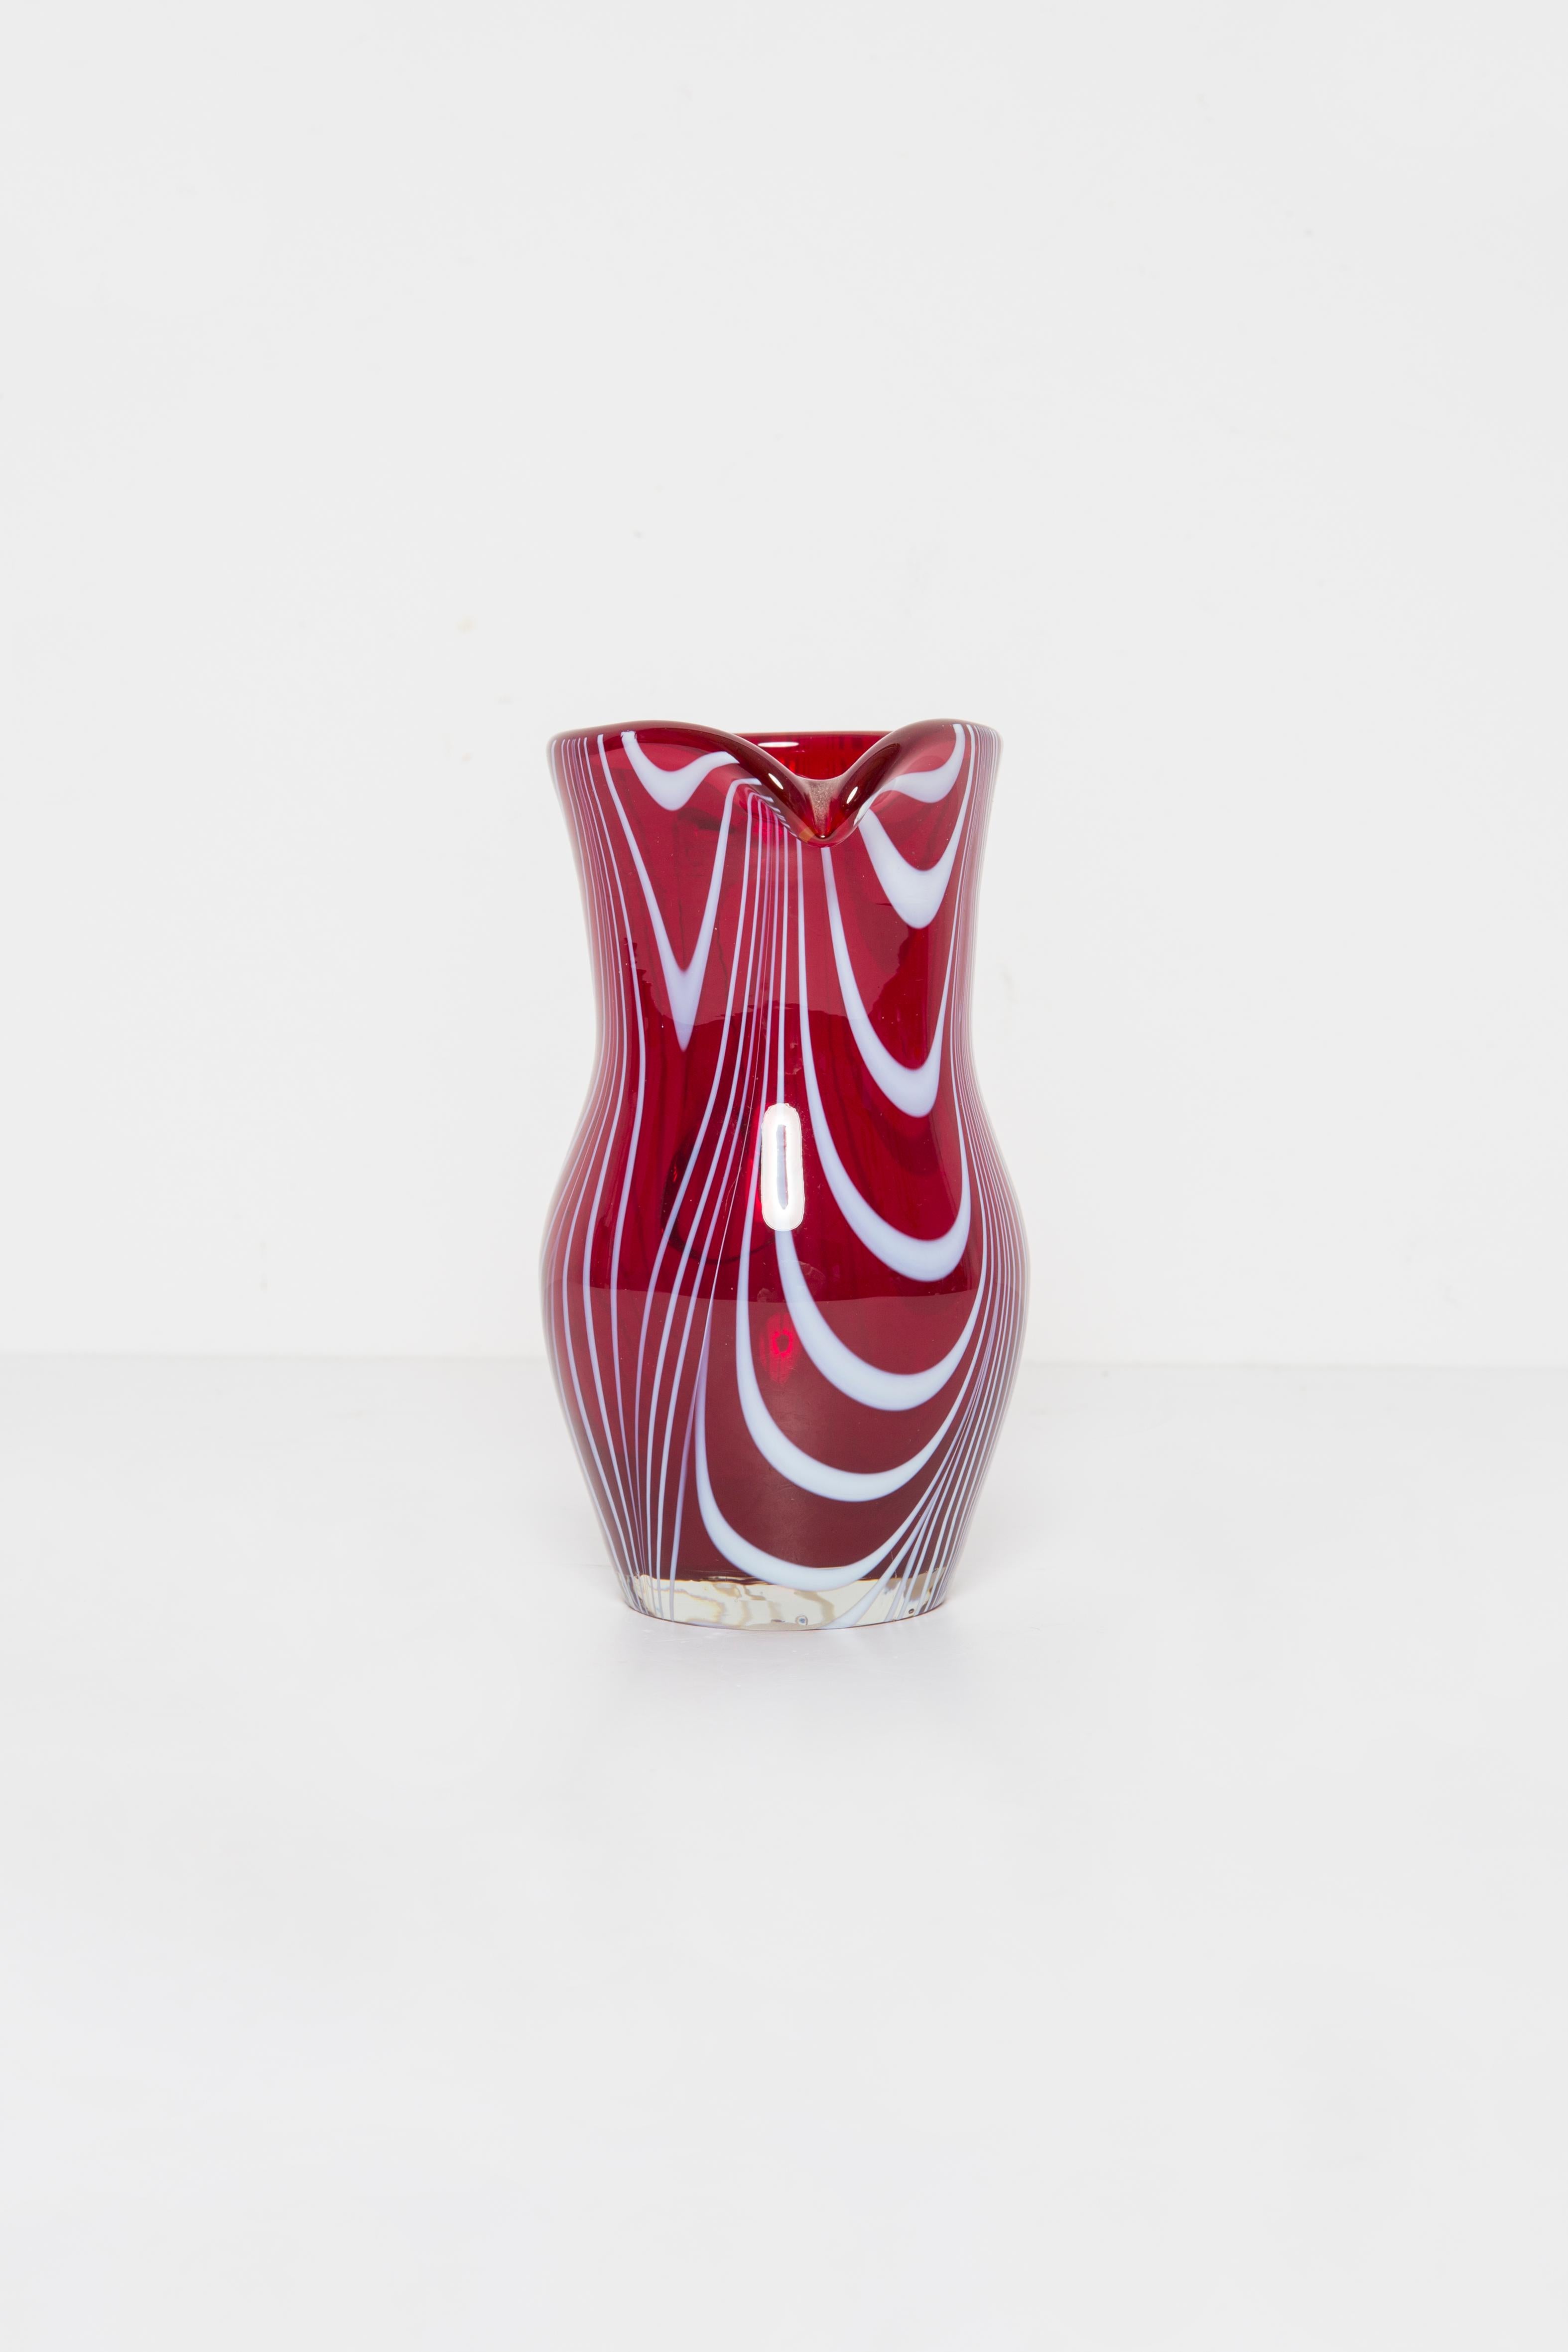 Mid Century Vintage Dark Red Small Vase, Europe, 1960s For Sale 1